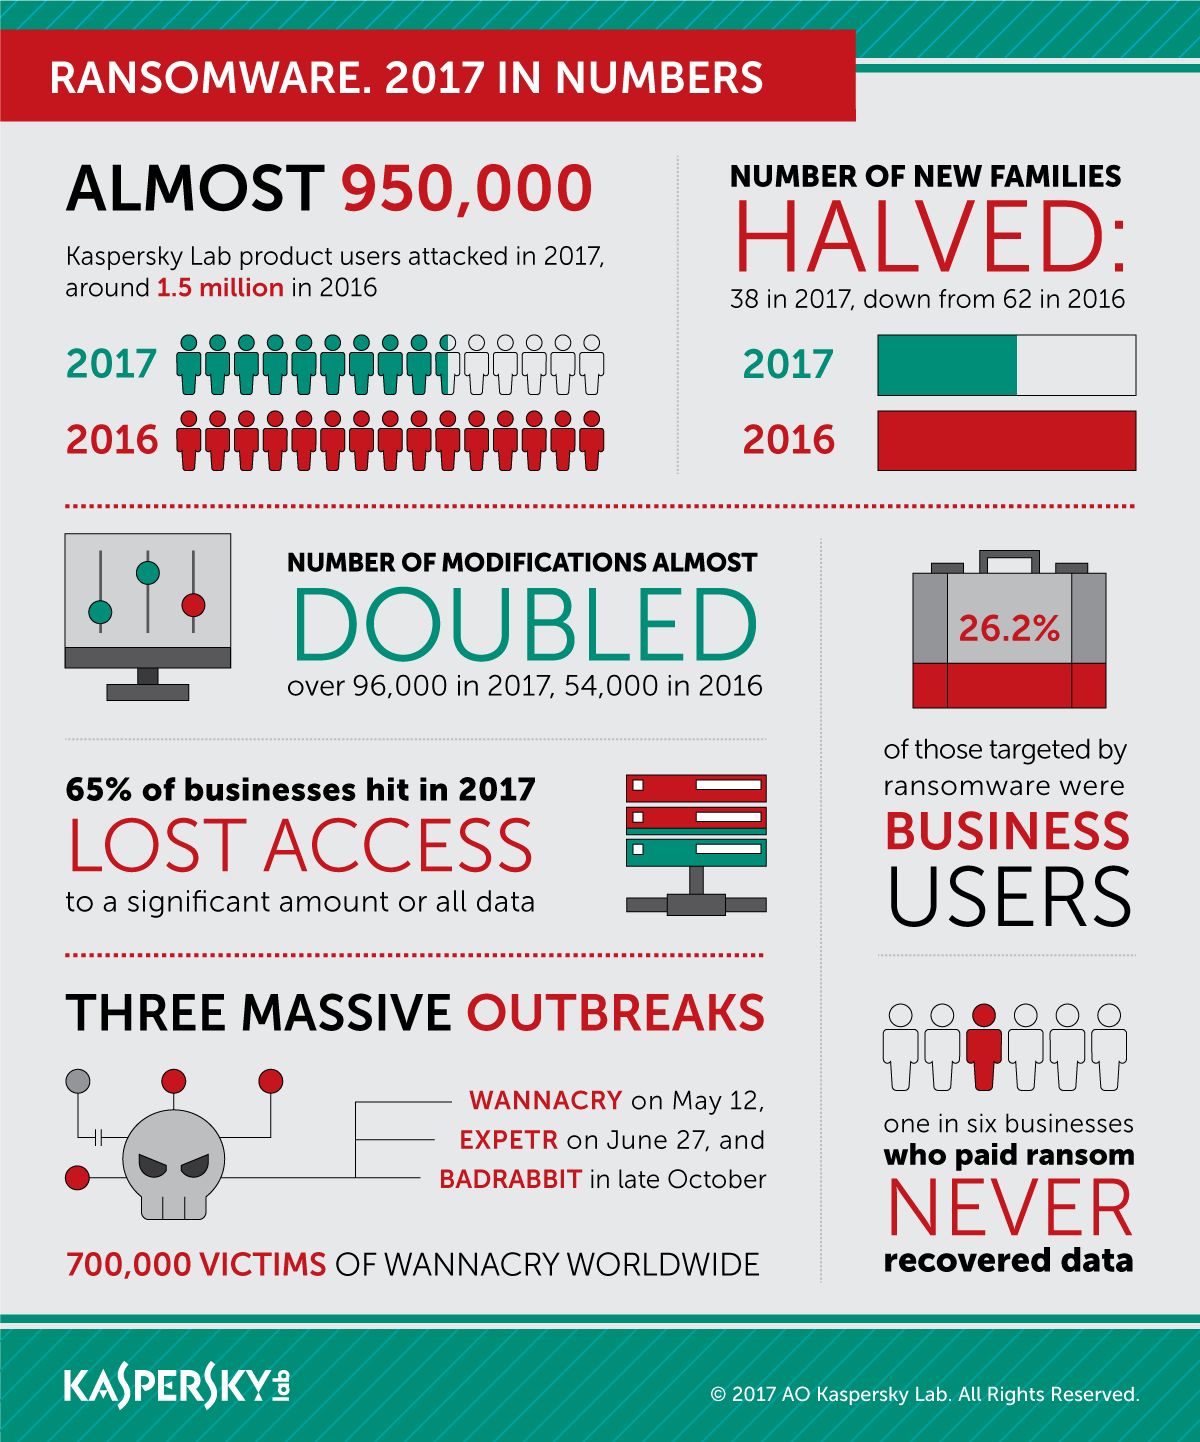 Ransomware in numbers (2017)